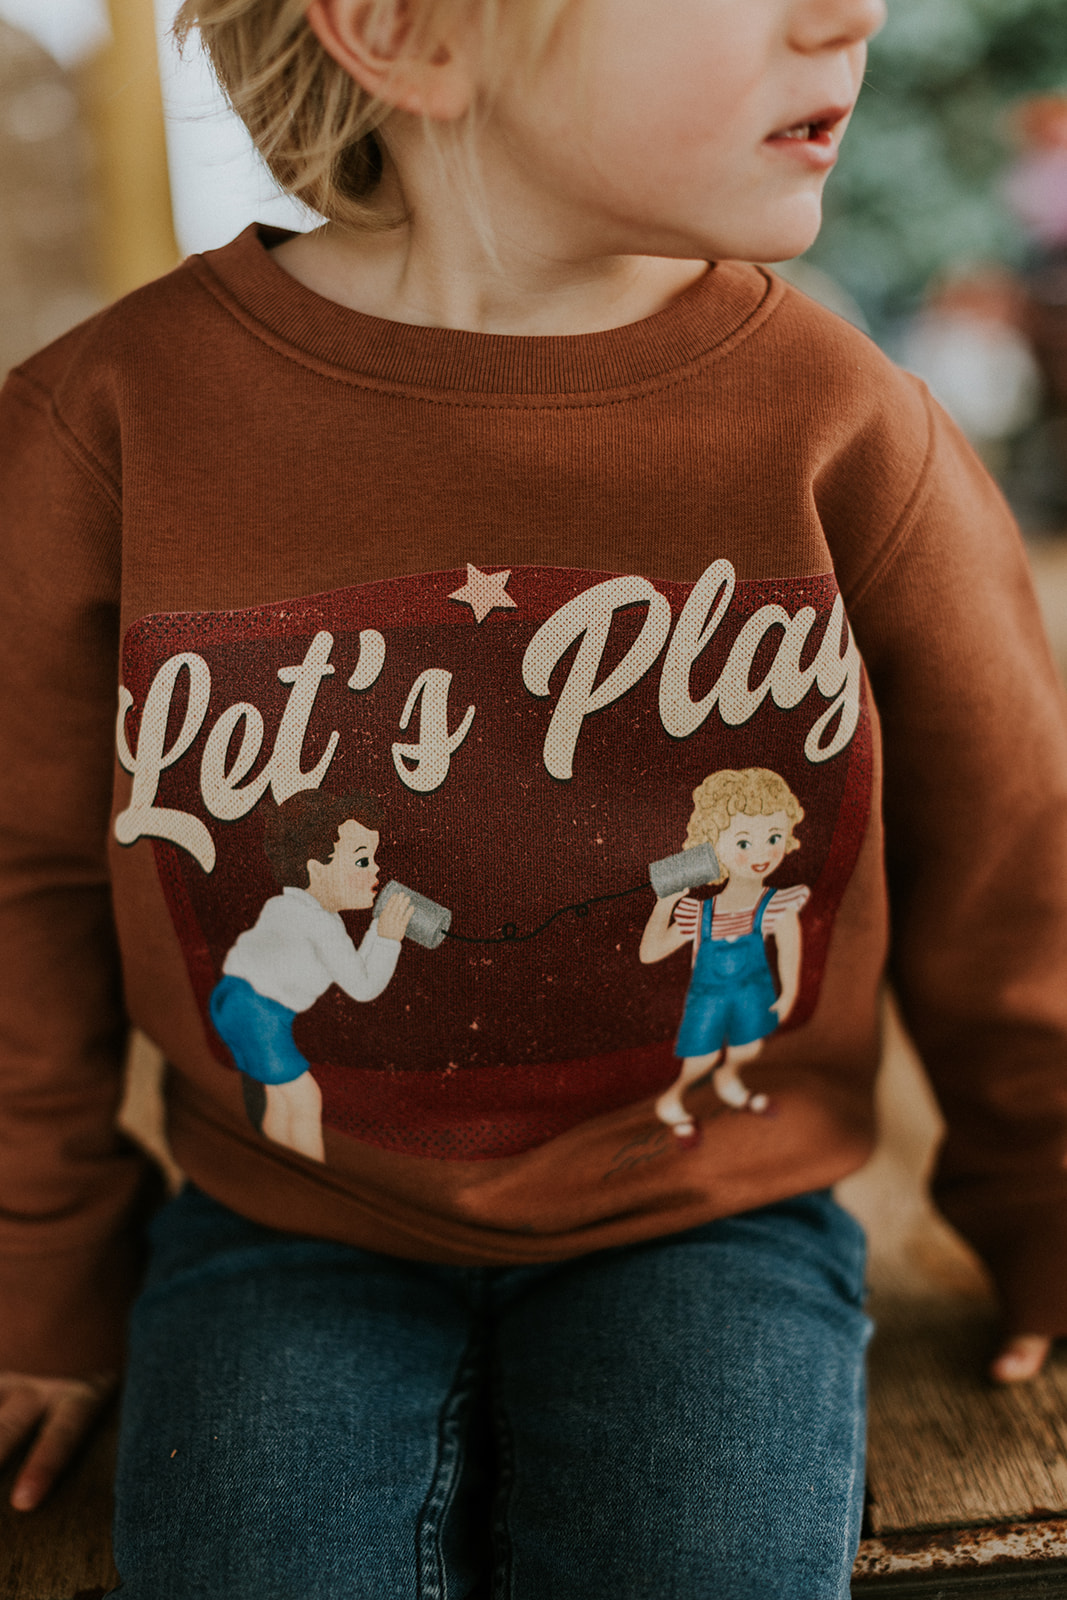 Let's Play vintage sweater by Mangos on Monday